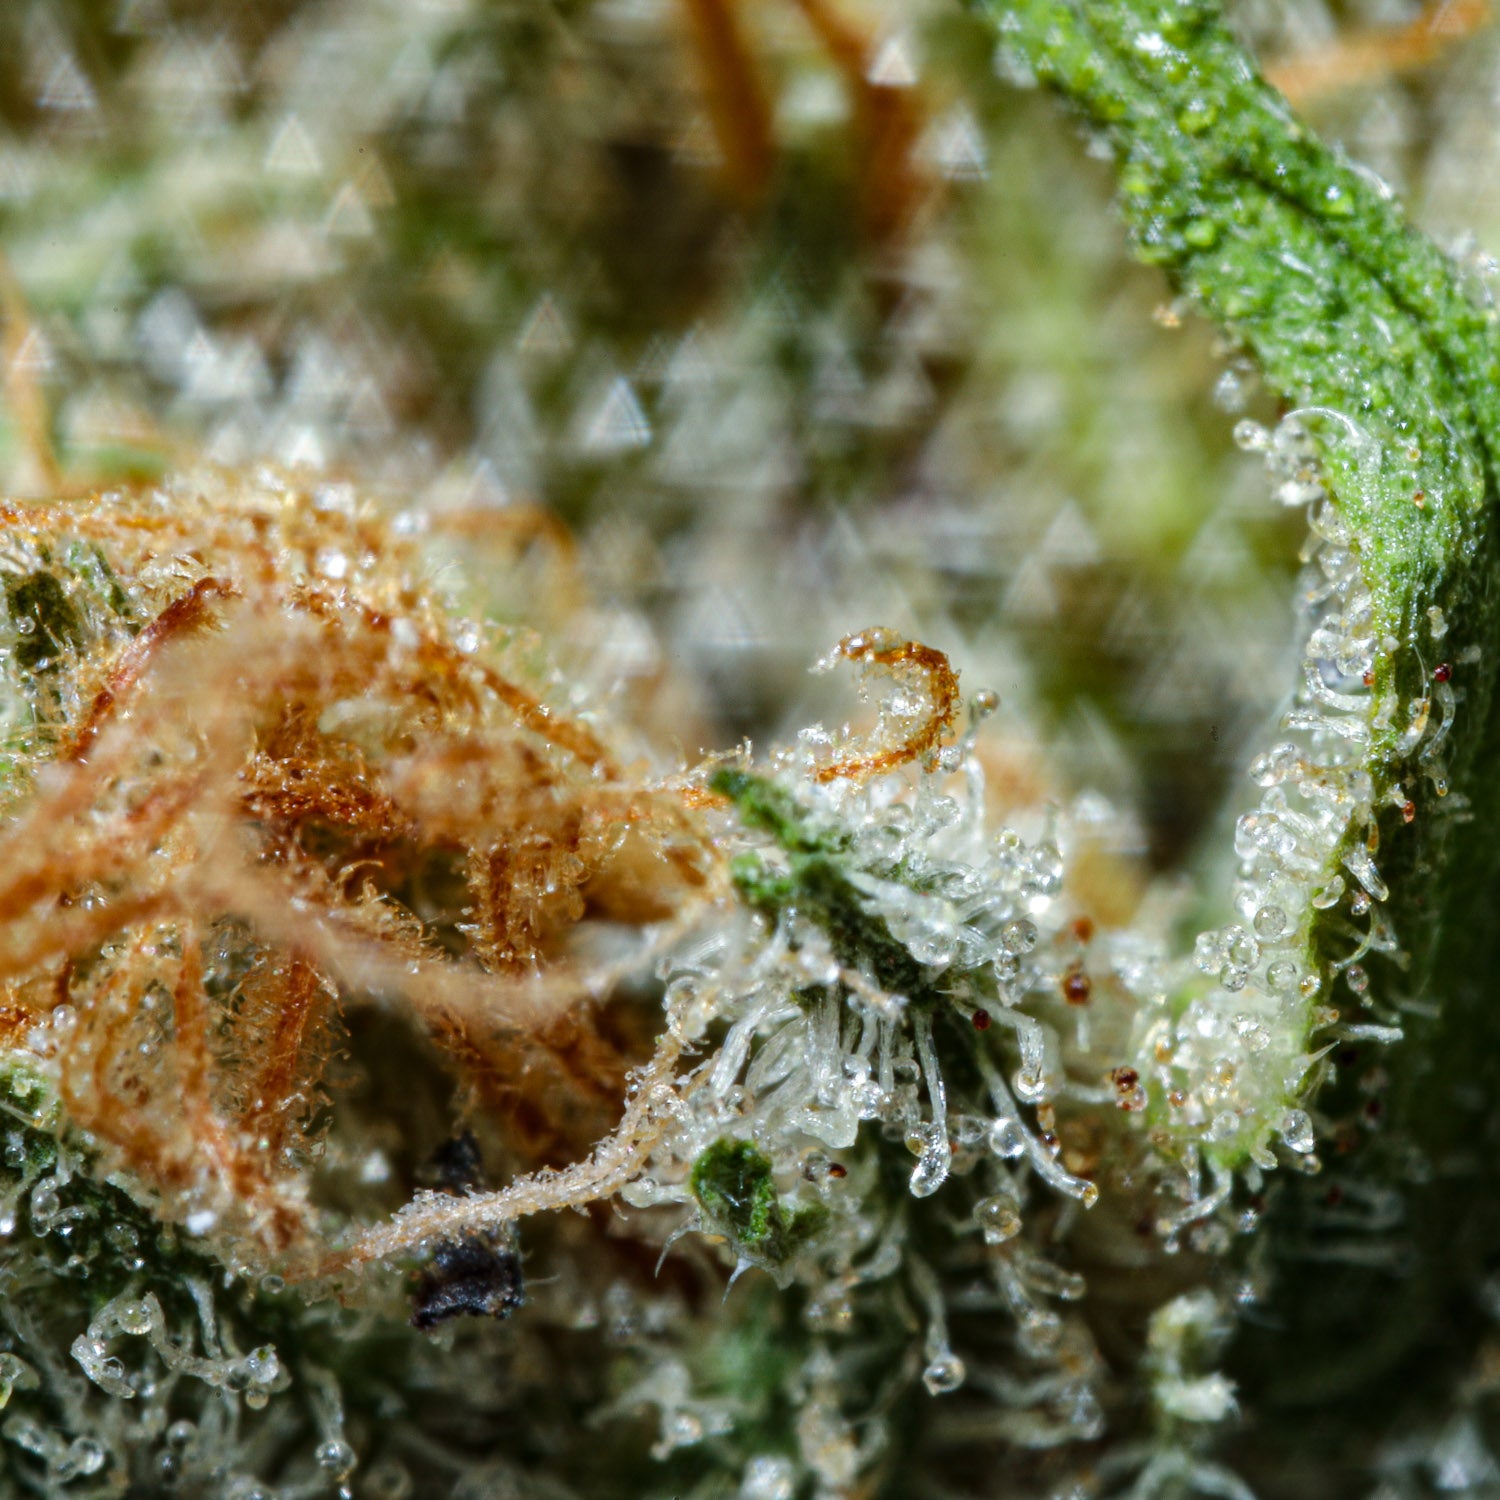 High-quality weed bud with amazing crystal trichomes.